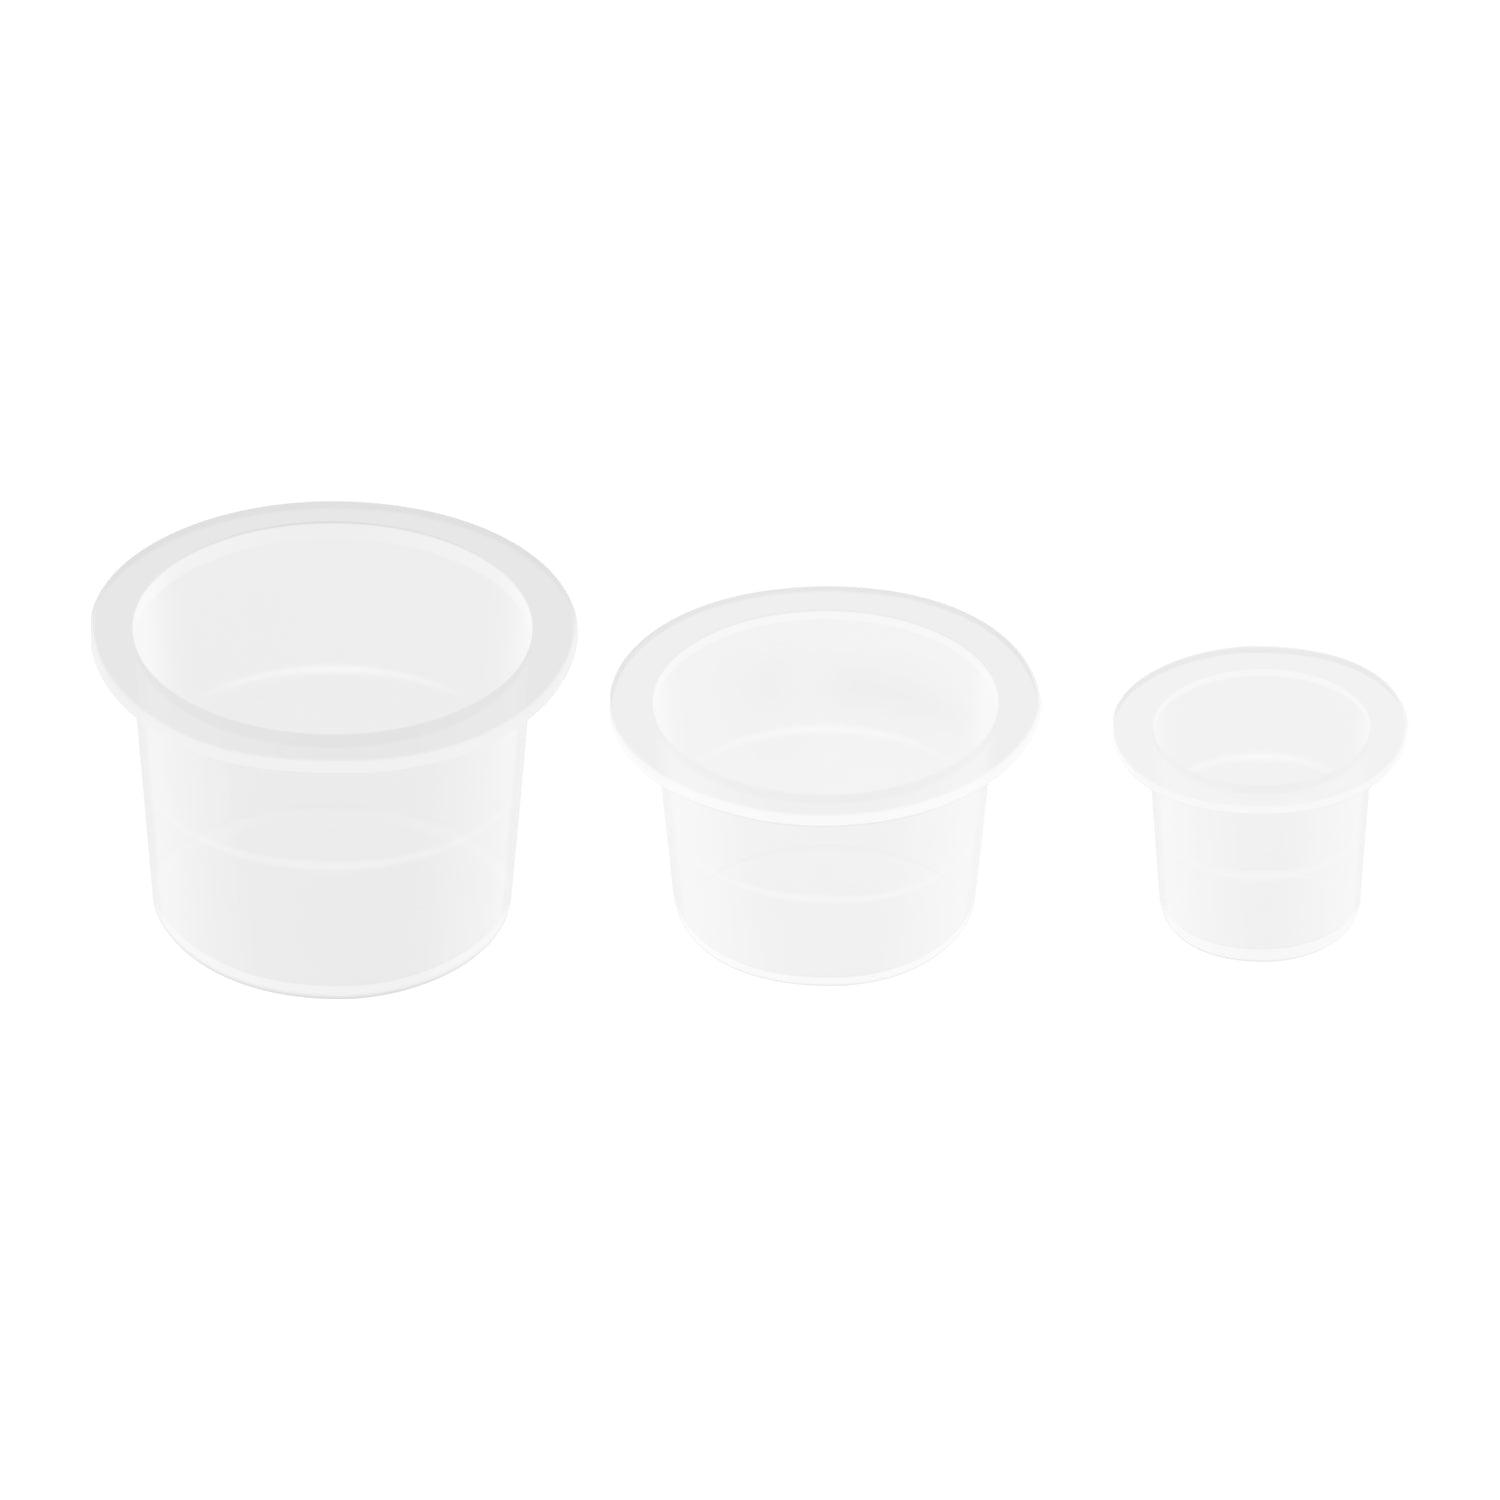 Tattoo Ink Cups 100pcs - tattoo numbing aftercare cream | Toochi